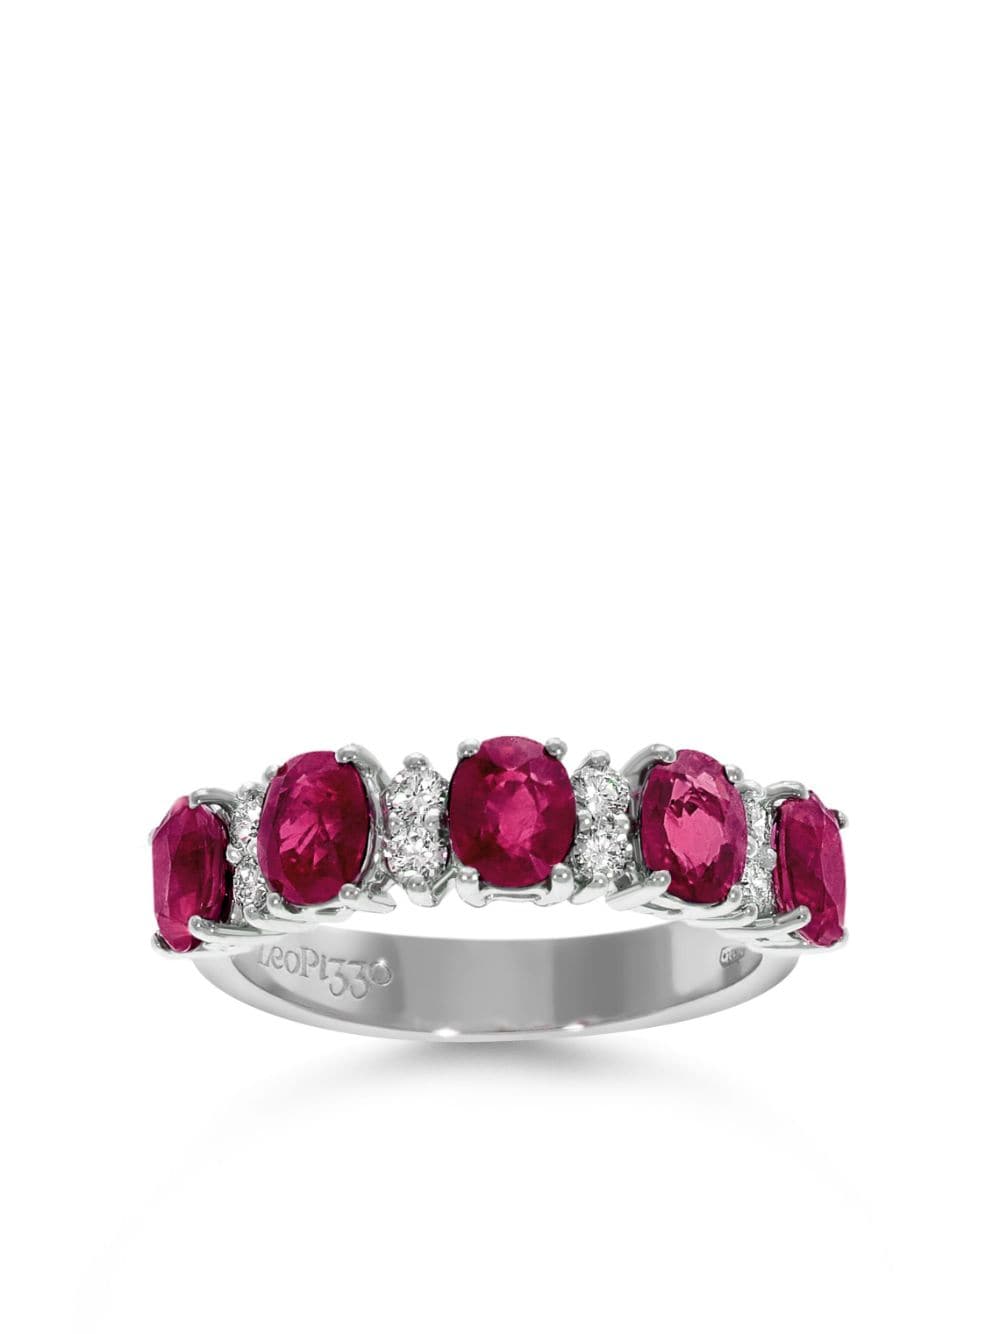 Leo Pizzo 18kt White Gold Diamond Ruby Eternity Band Ring In Silver